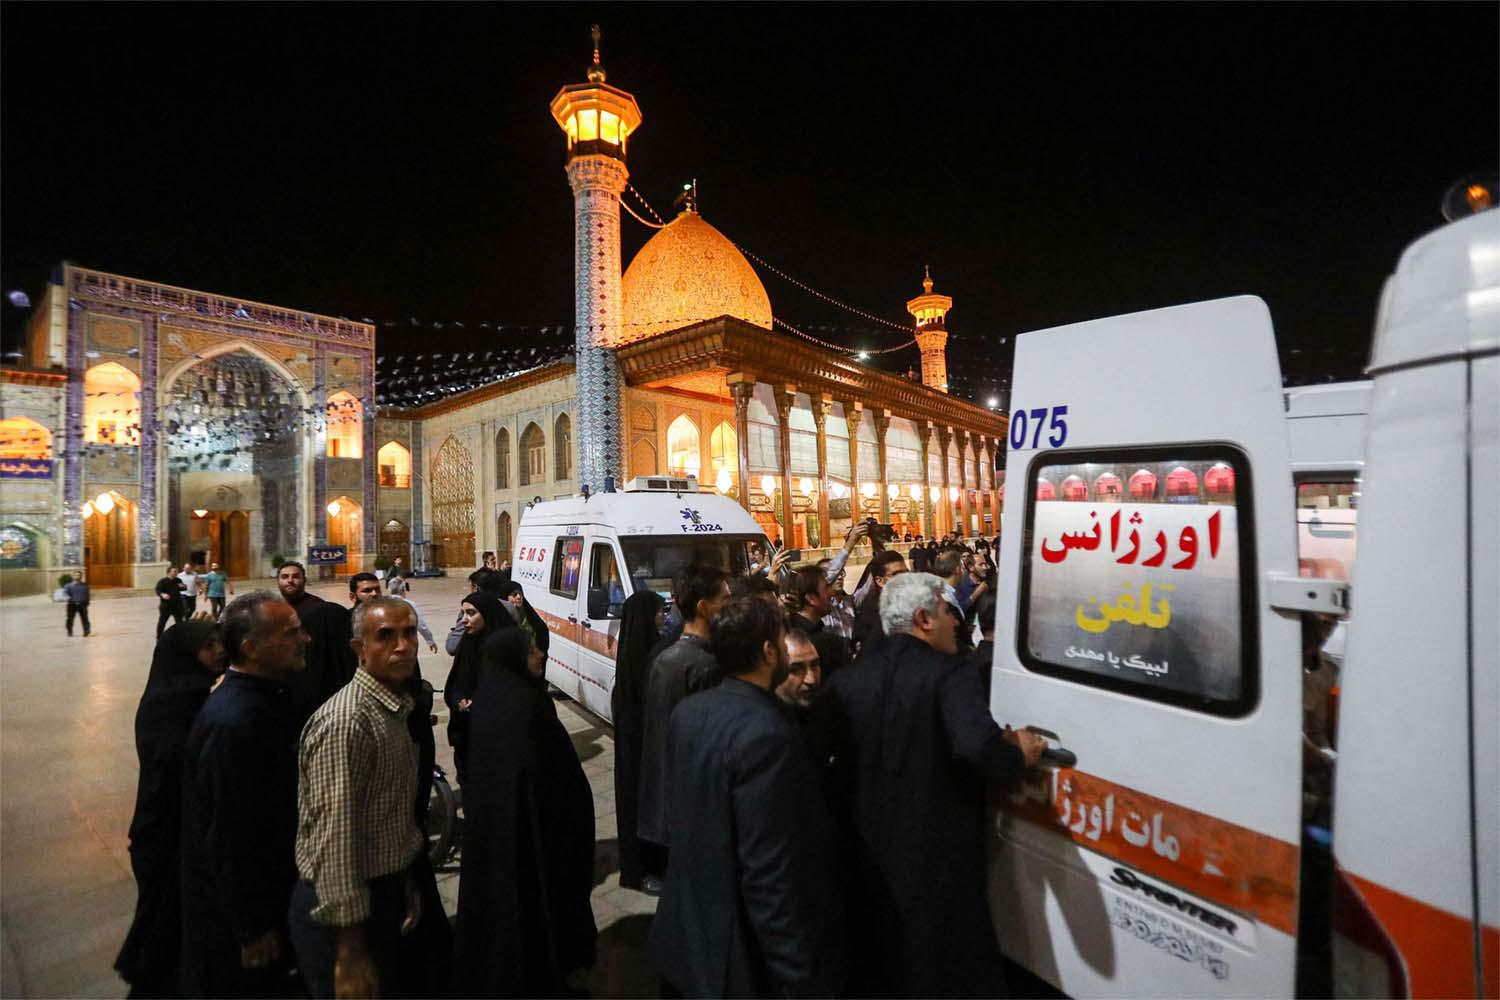 Islamic State last October said it had launched an attack on the shrine 